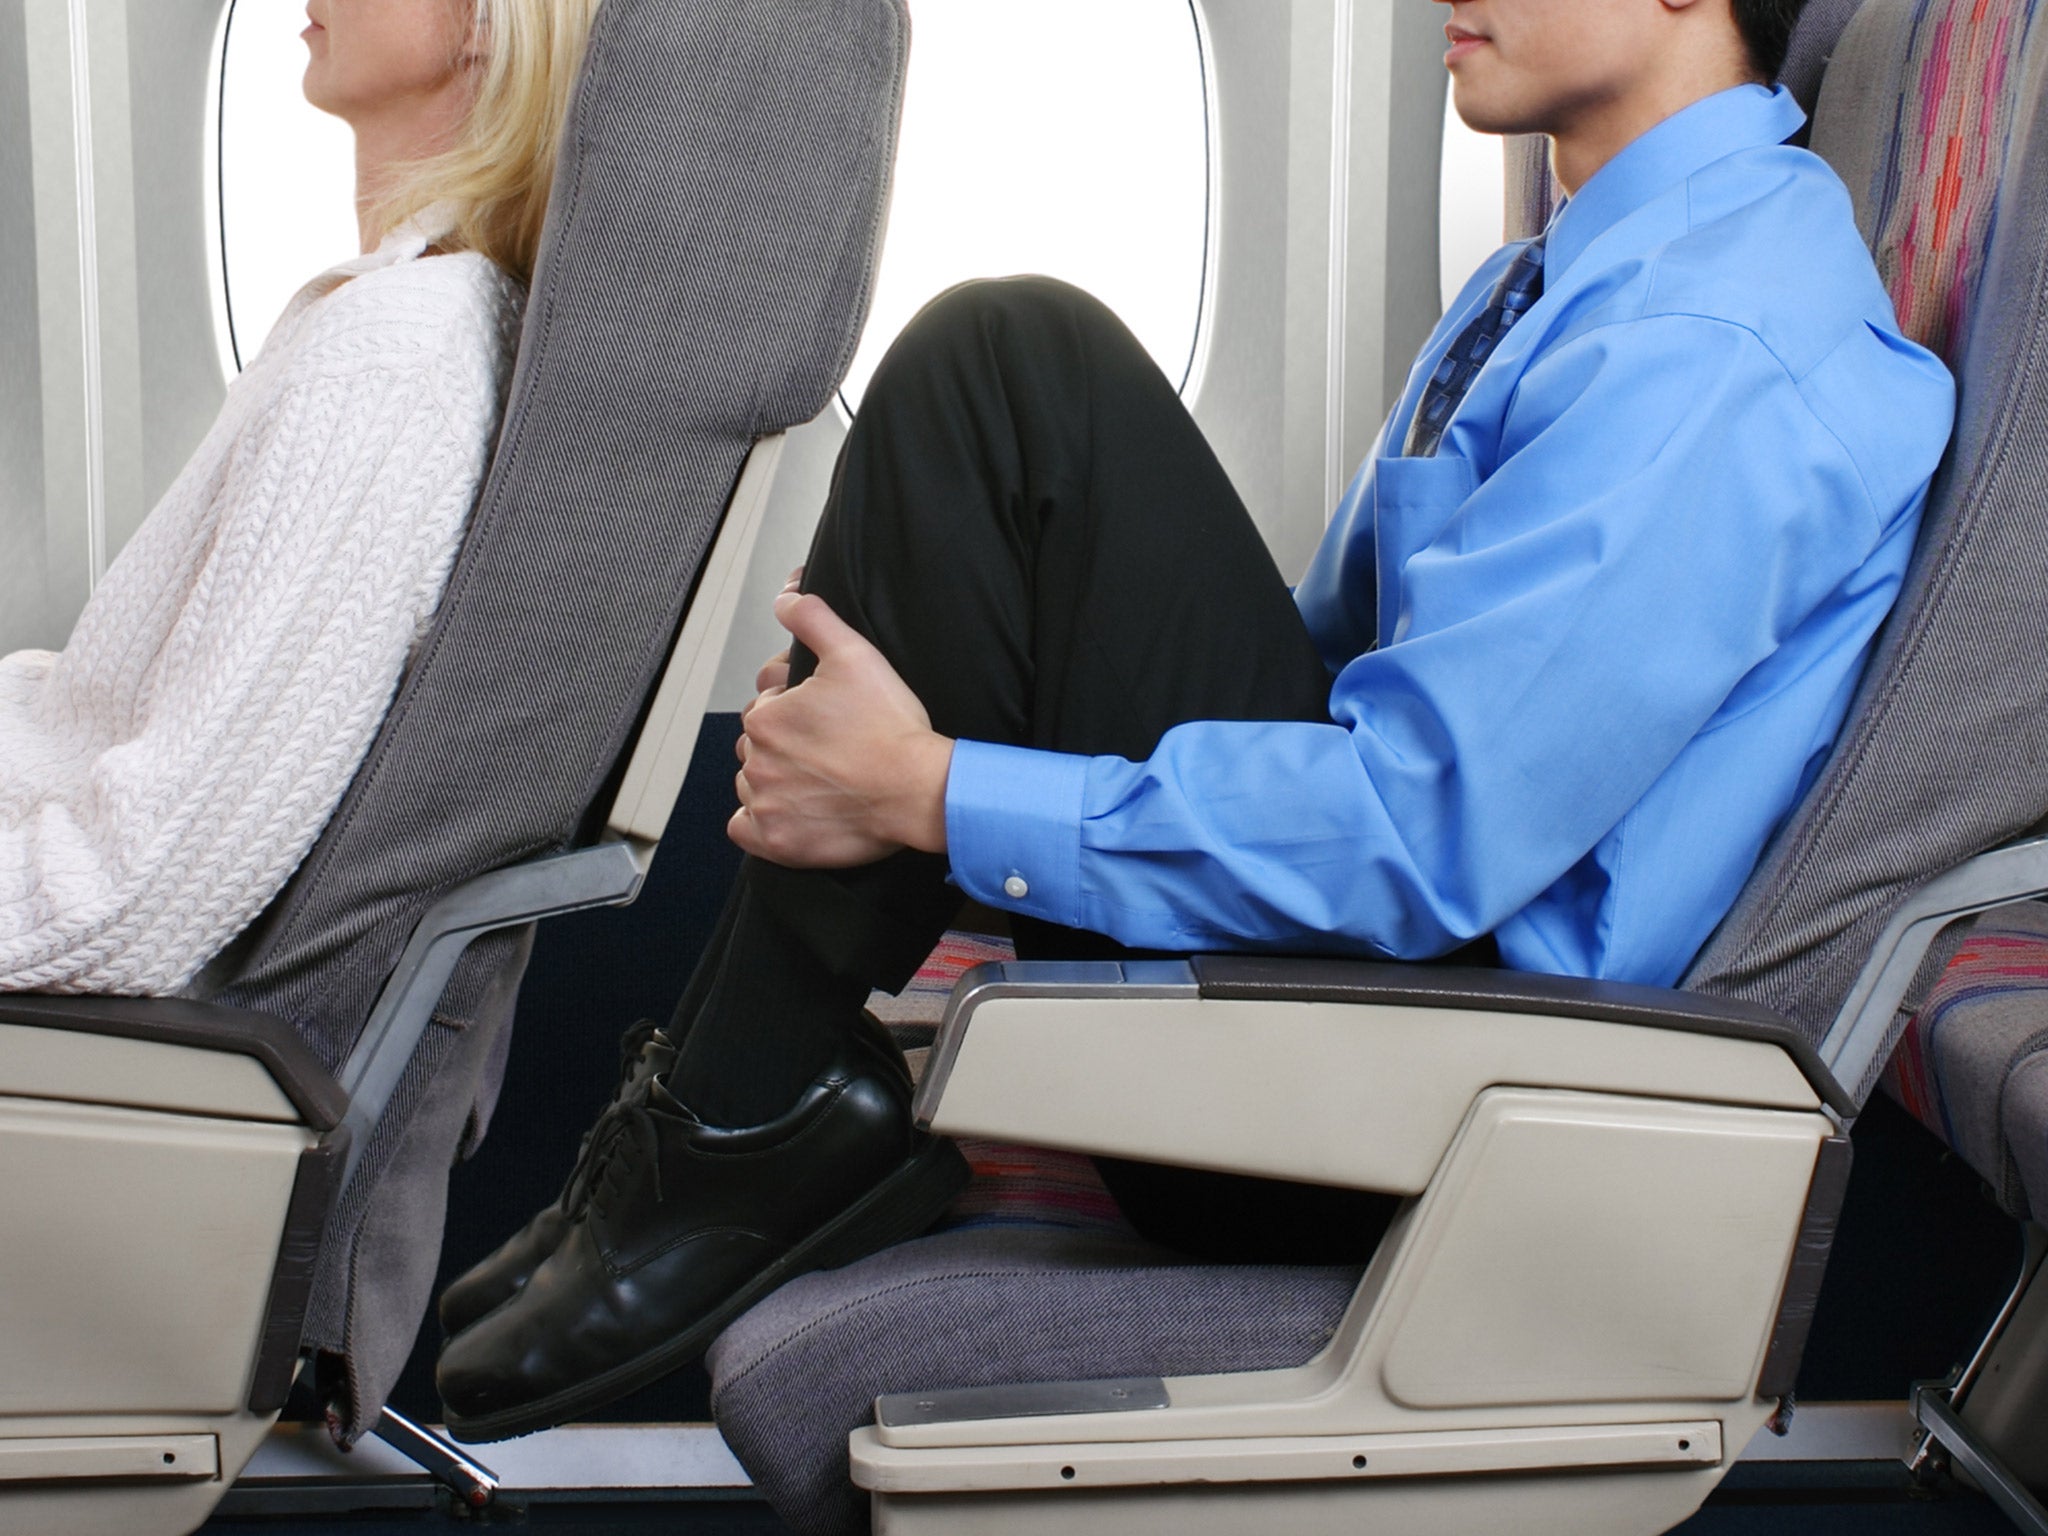 Personal space for economy-class passengers in the US has reduced over time